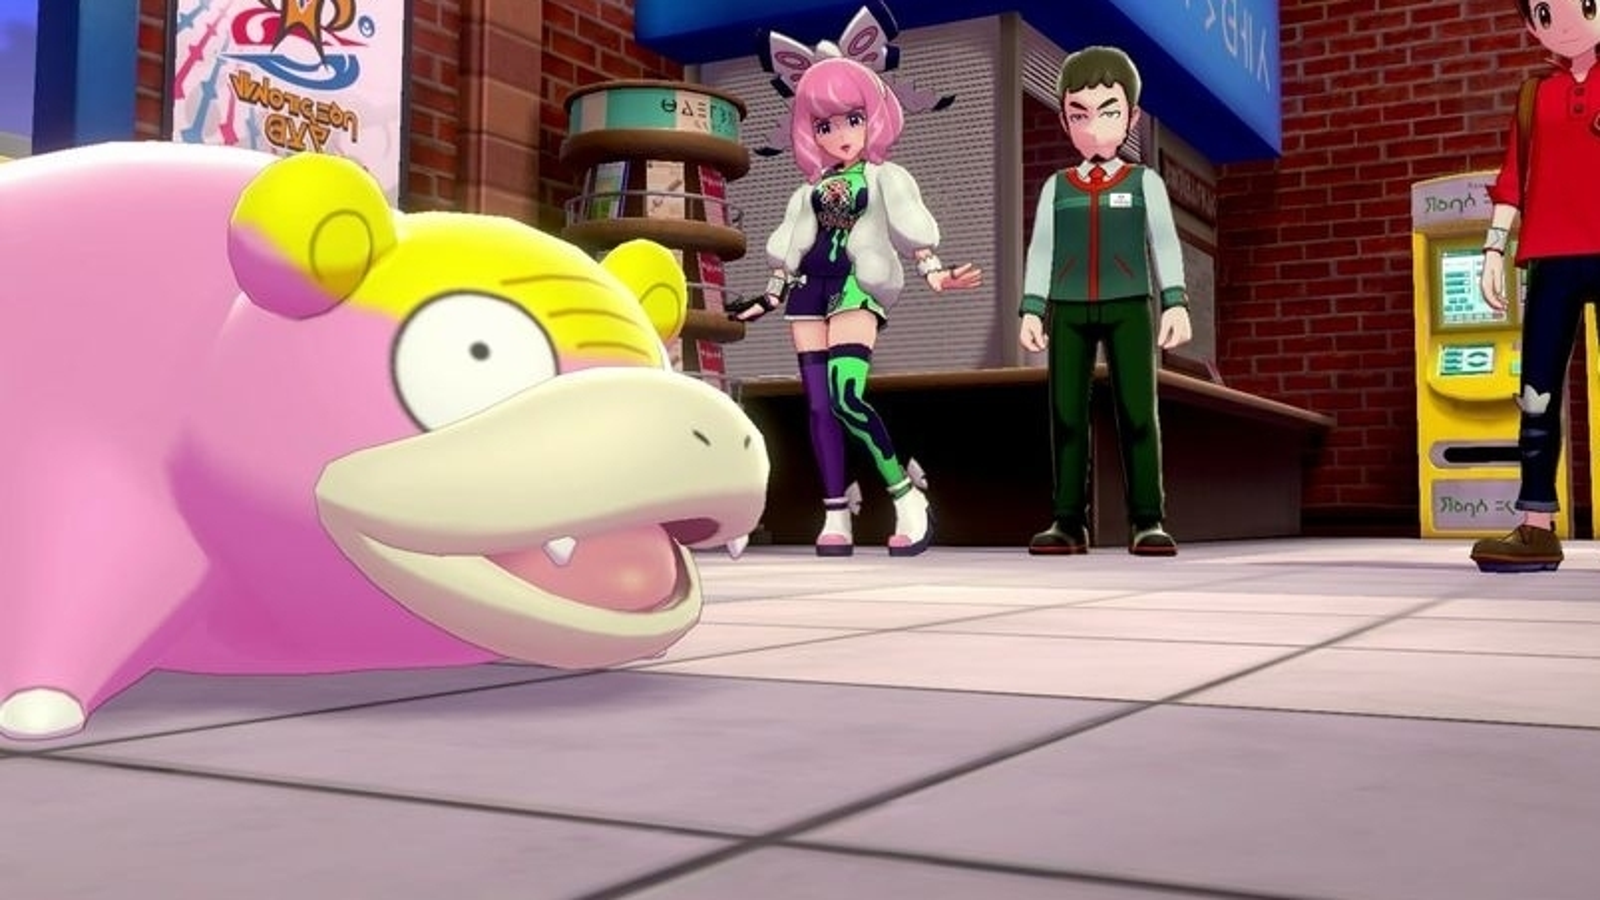 Pokemon Sword and Shield's Expansion Pass is Better Than a New Game